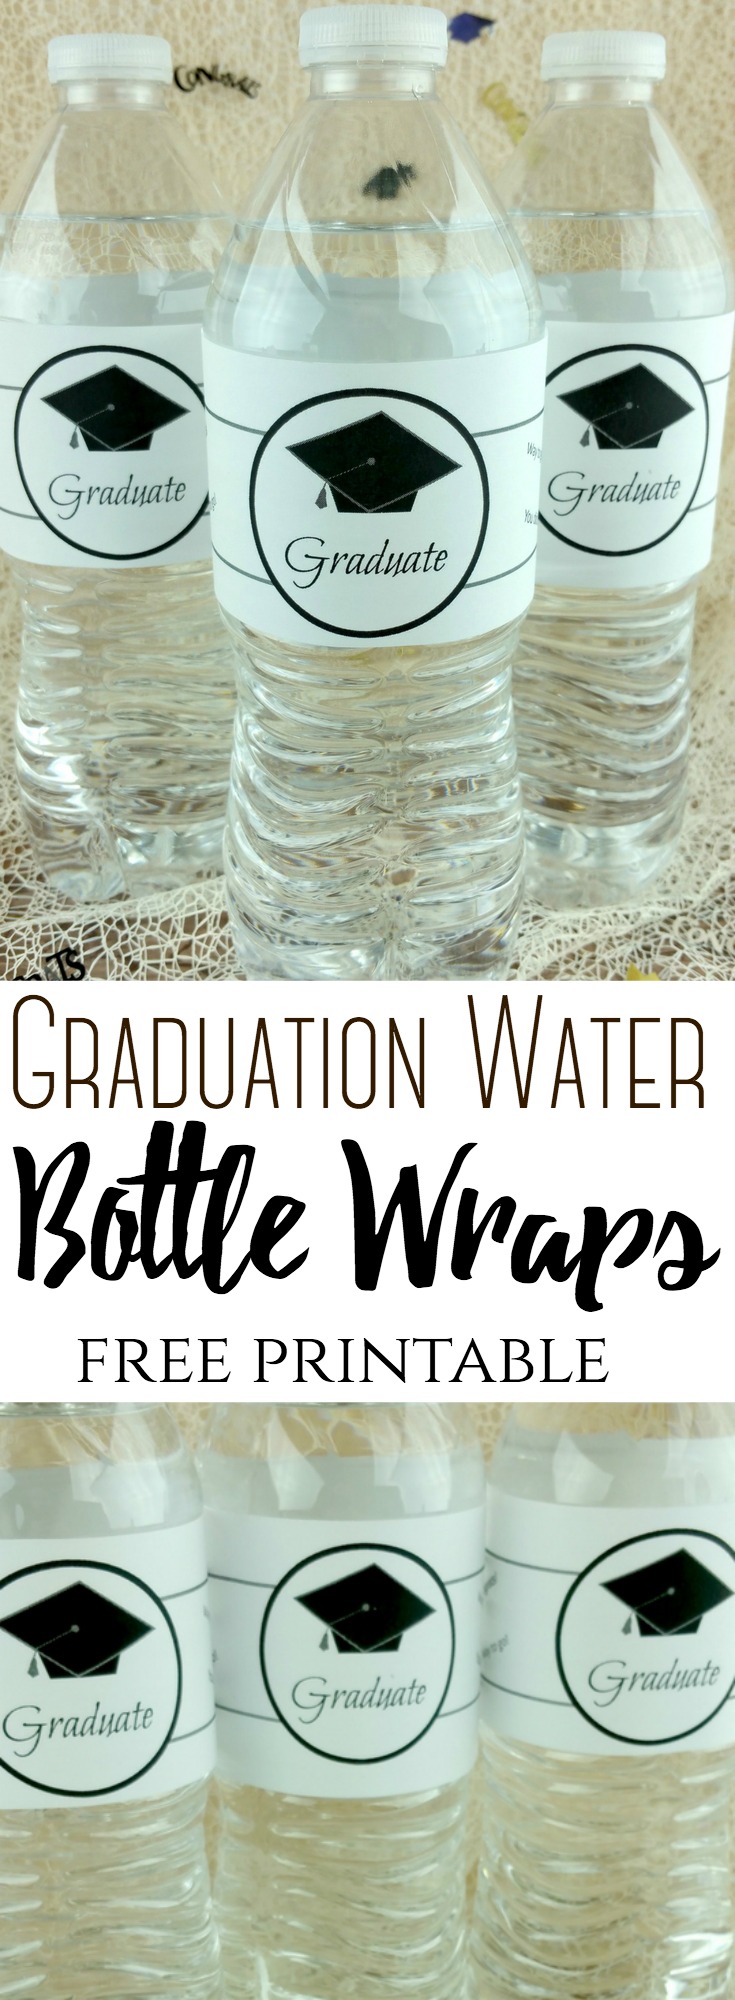 Graduation Water Bottle Wraps (Free printable label) #graduation #label #printable #gradparty #graduationparty #waterbottle #budget #inexpensive